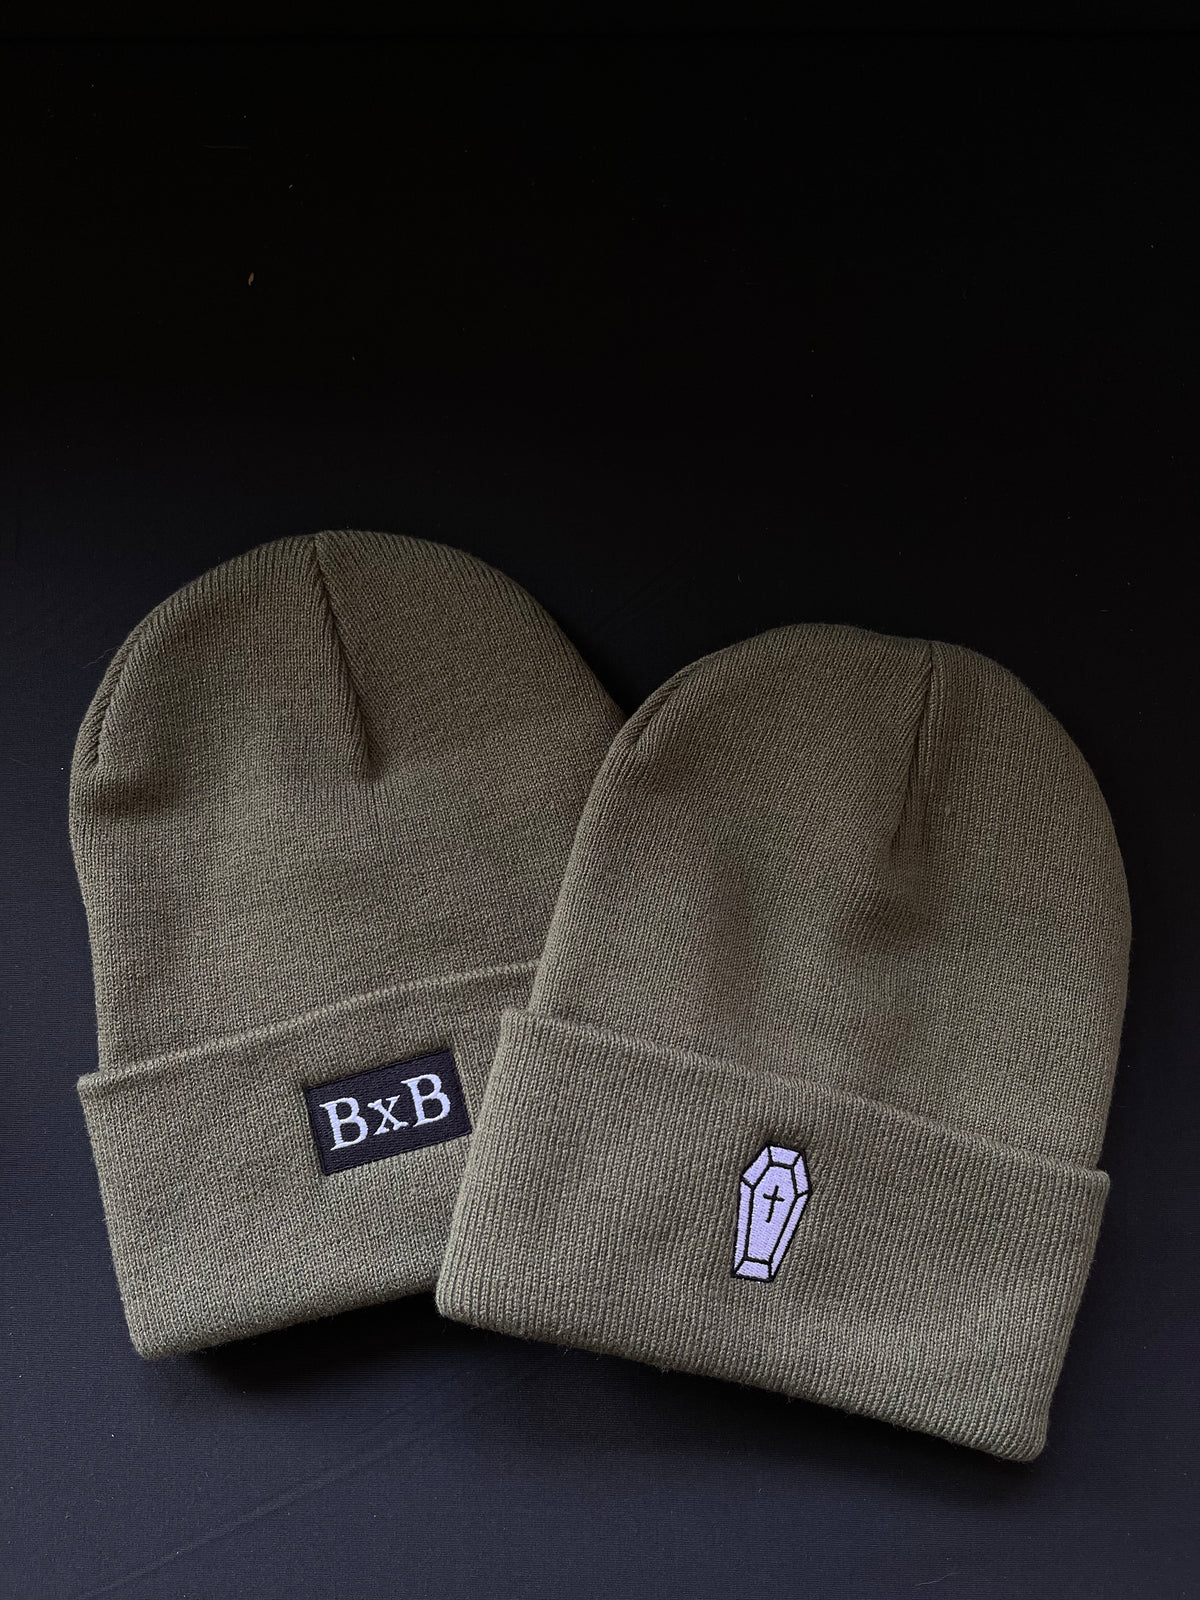 Crypt Keeper's Reversible Beanie